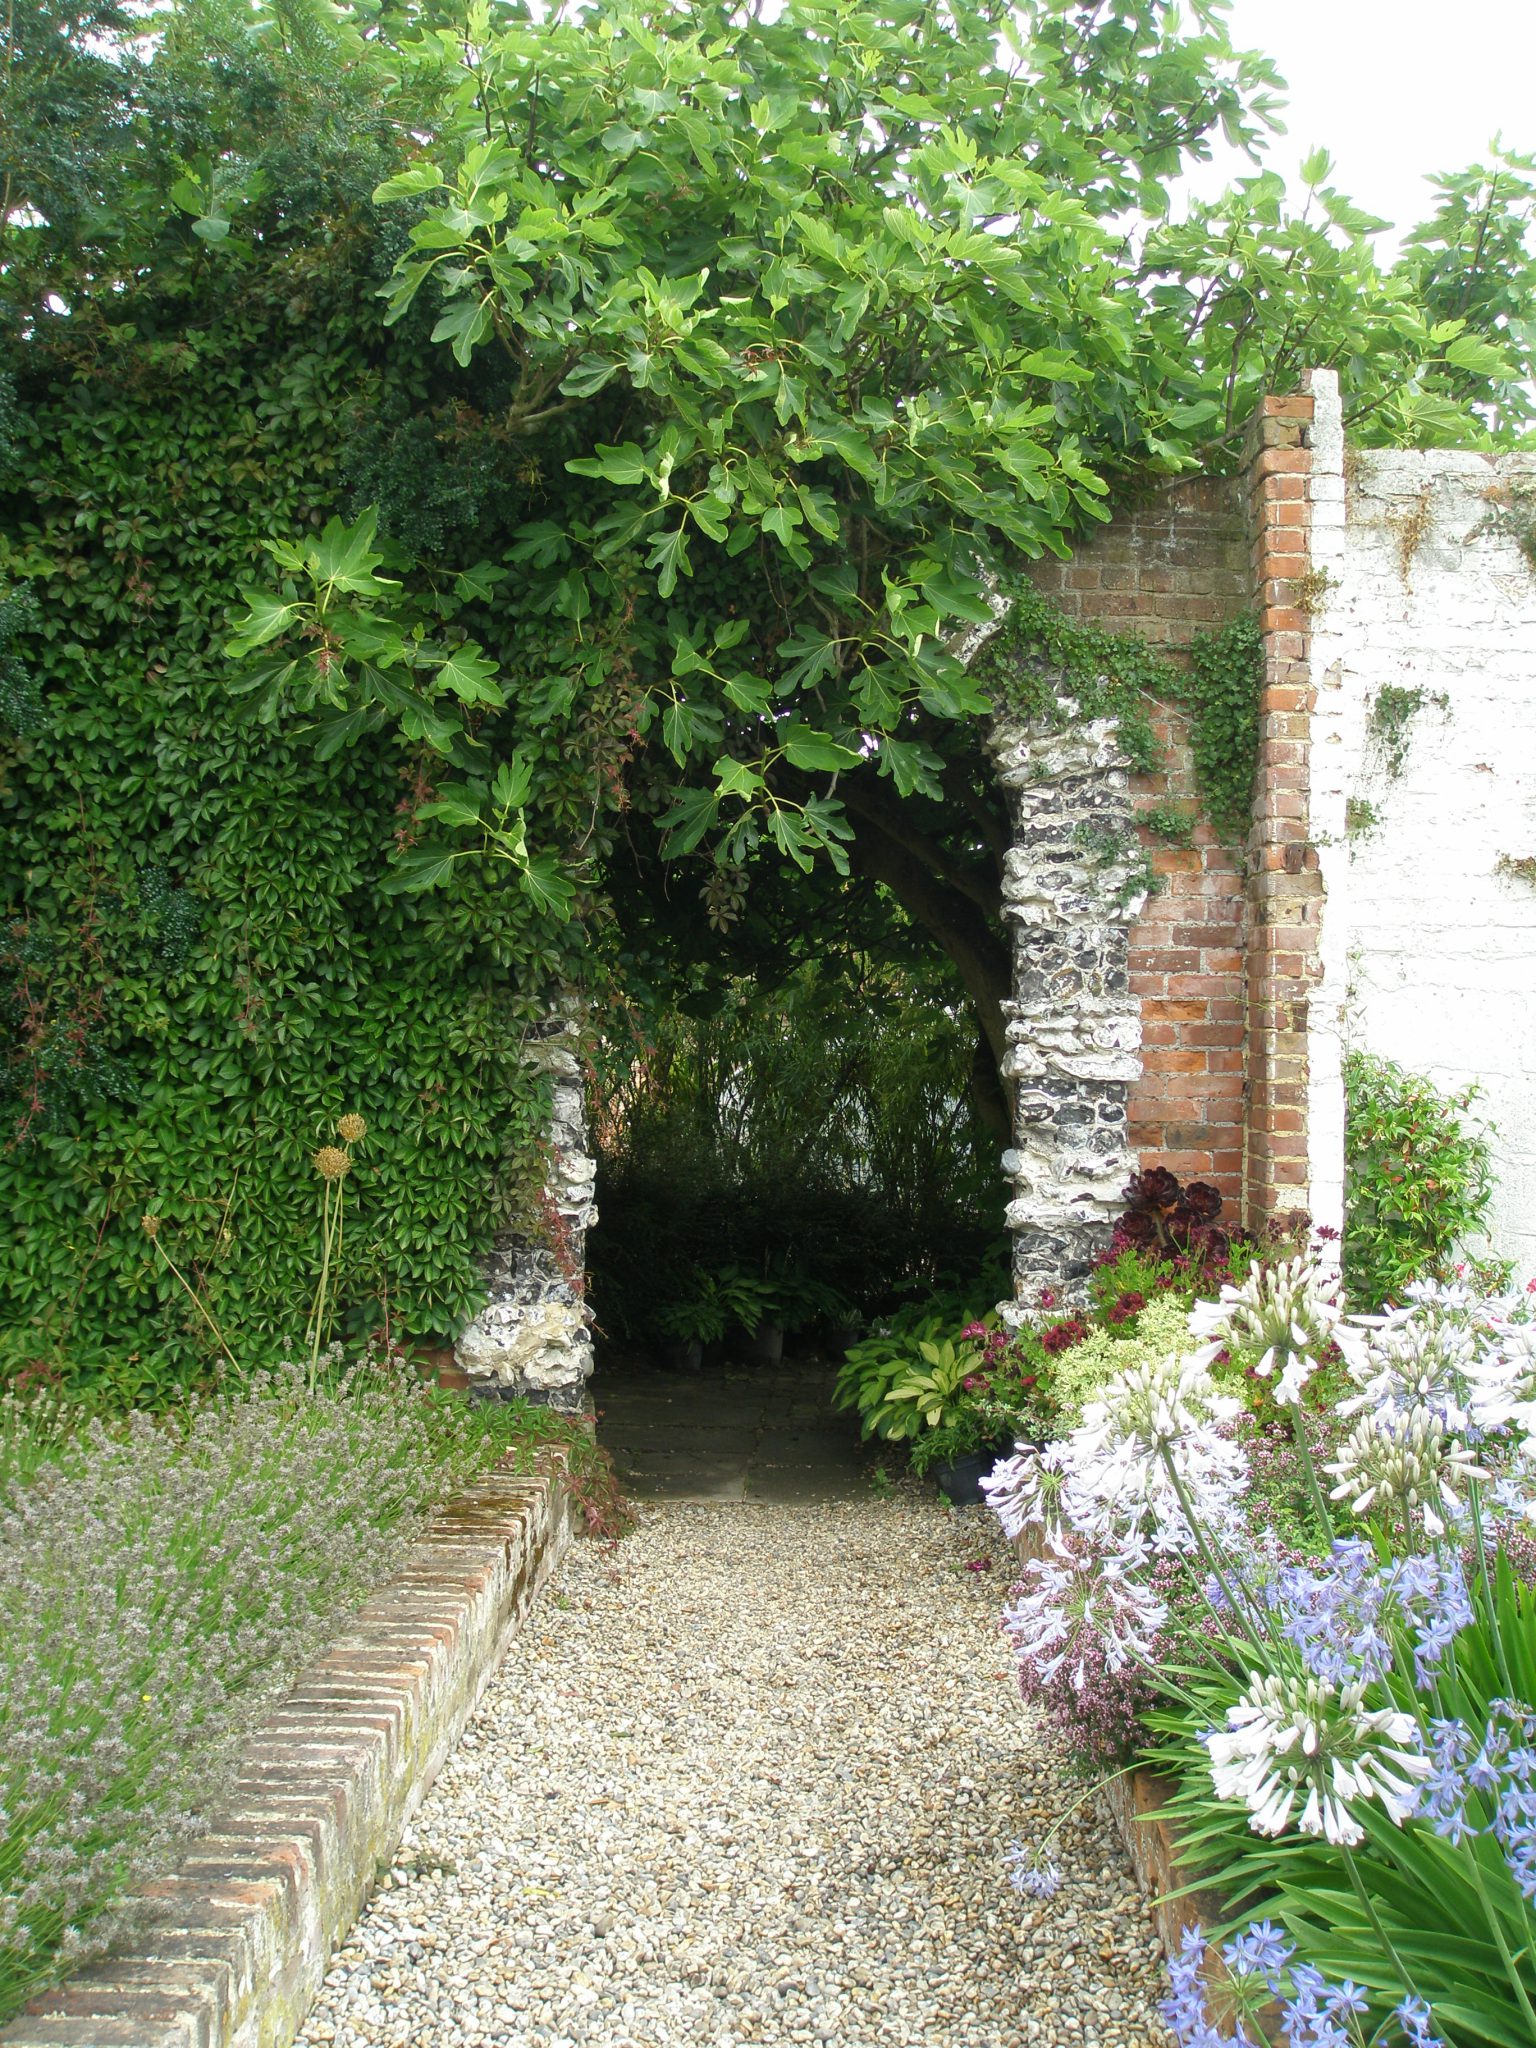 One of the rare curiosities in the Walled Garden is this flint-decorated archway.